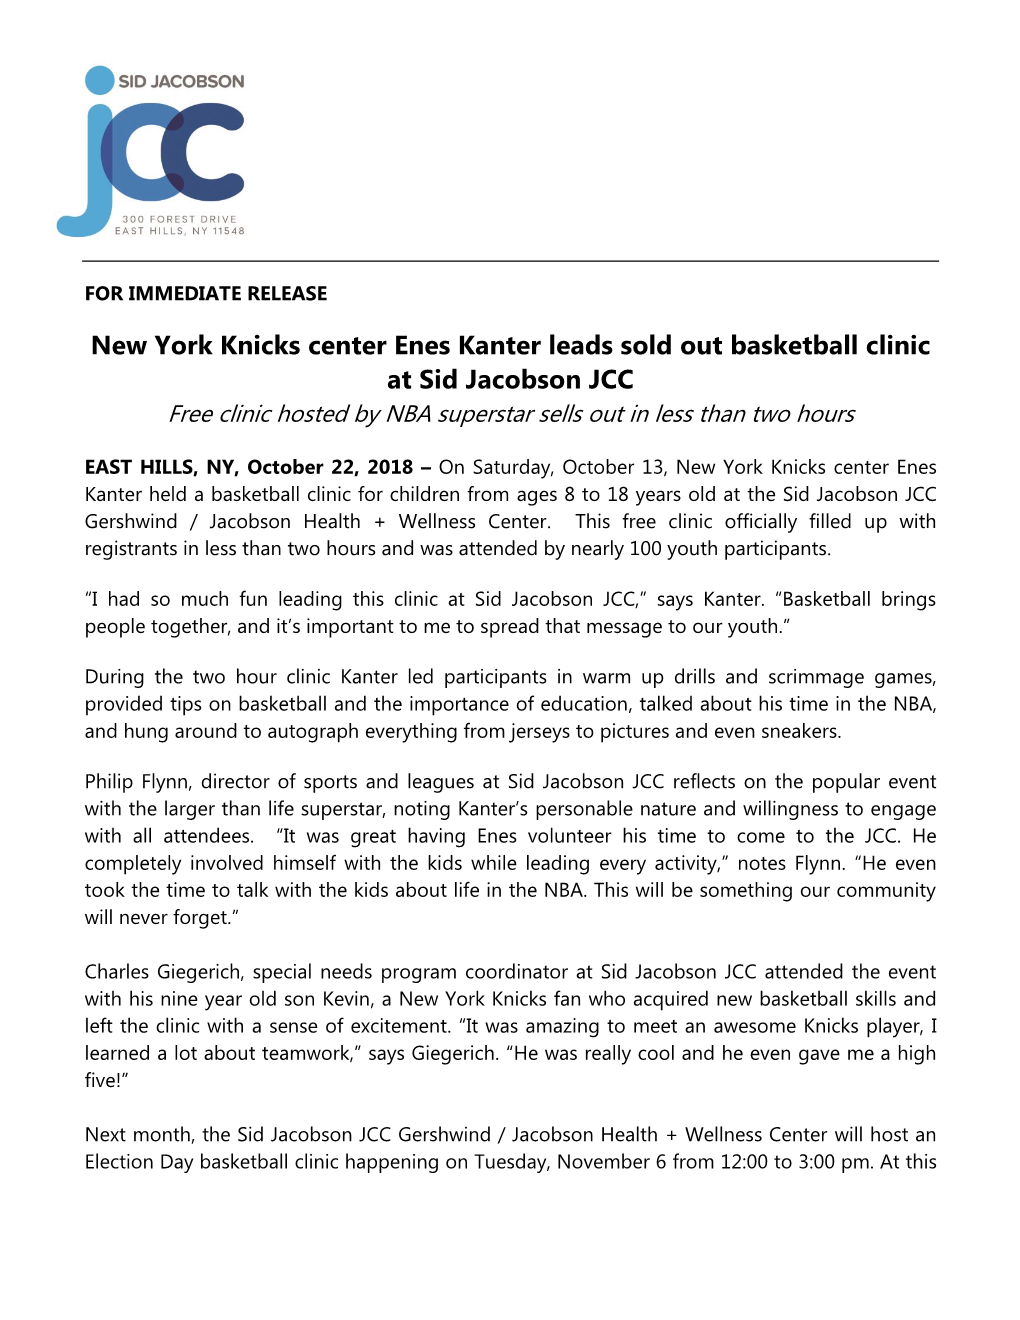 New York Knicks Center Enes Kanter Leads Sold out Basketball Clinic at Sid Jacobson JCC Free Clinic Hosted by NBA Superstar Sells out in Less Than Two Hours